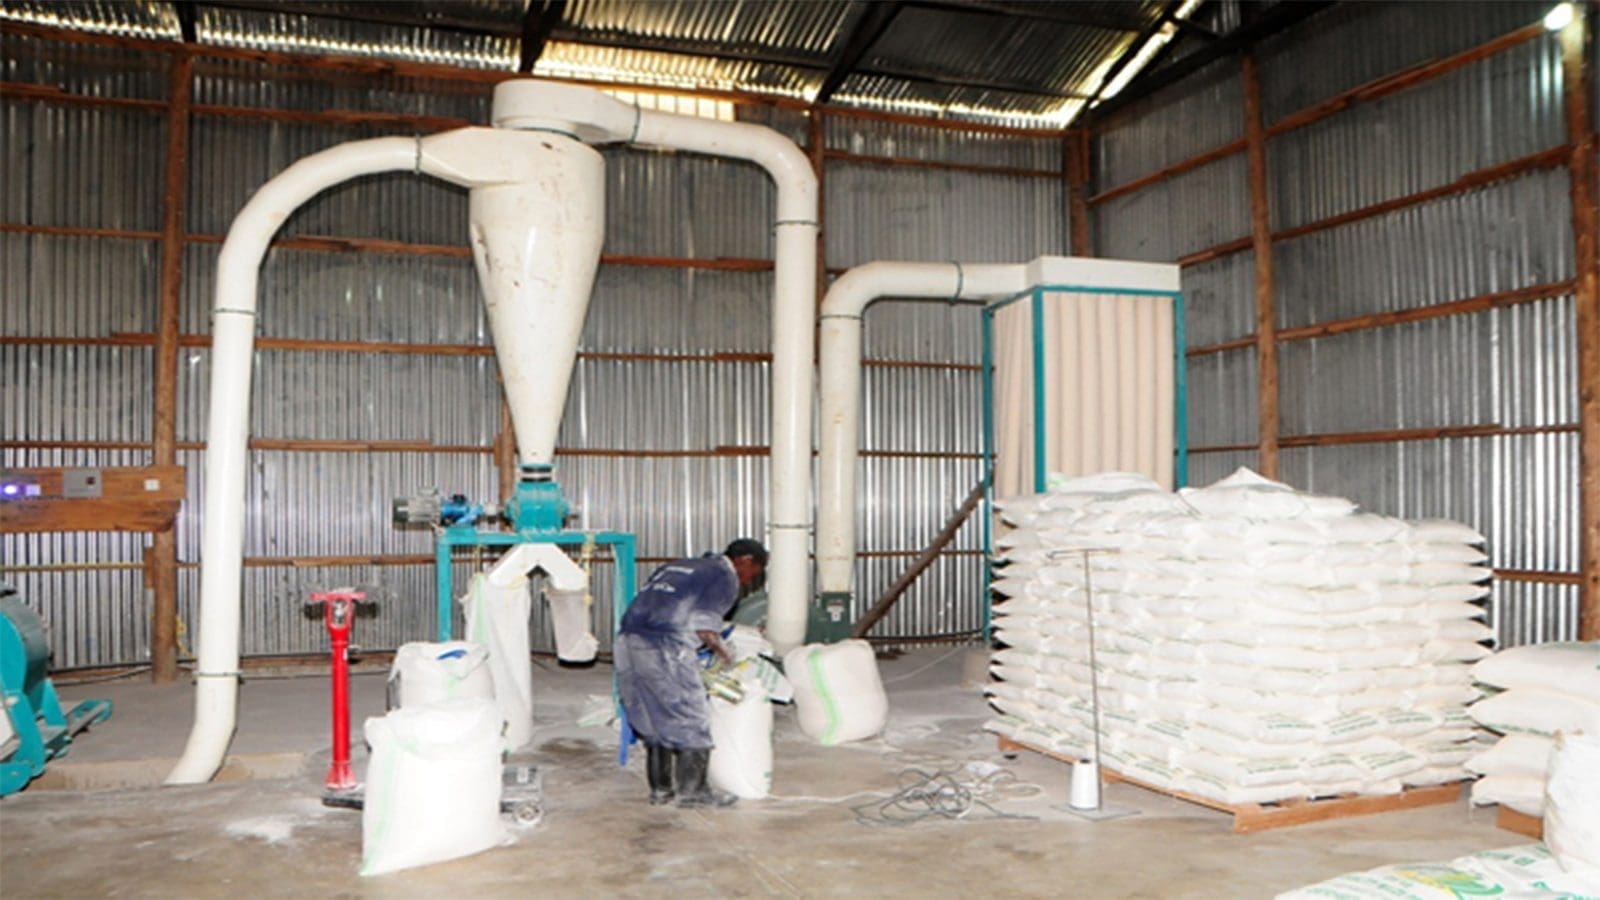 Eastern Africa Grain Council trains millers on basic grain handling practices